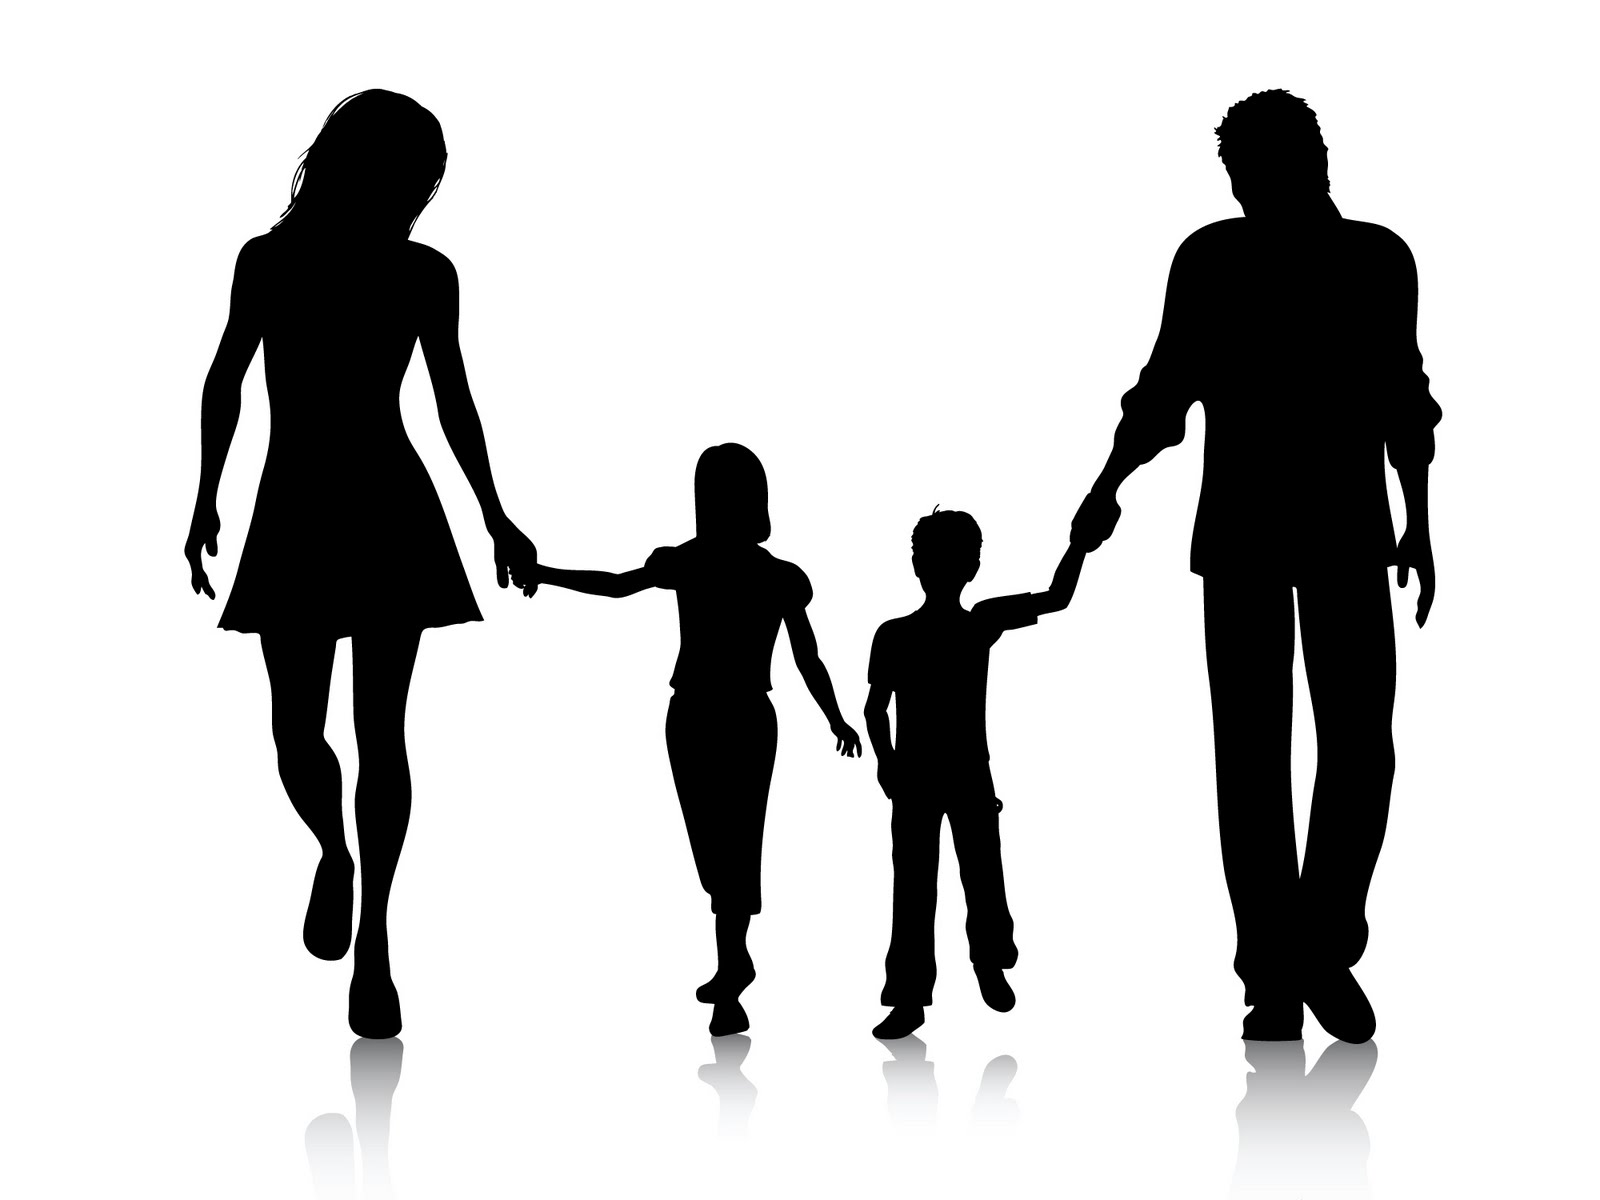 Clipart Family Members | Clipart library - Free Clipart Images